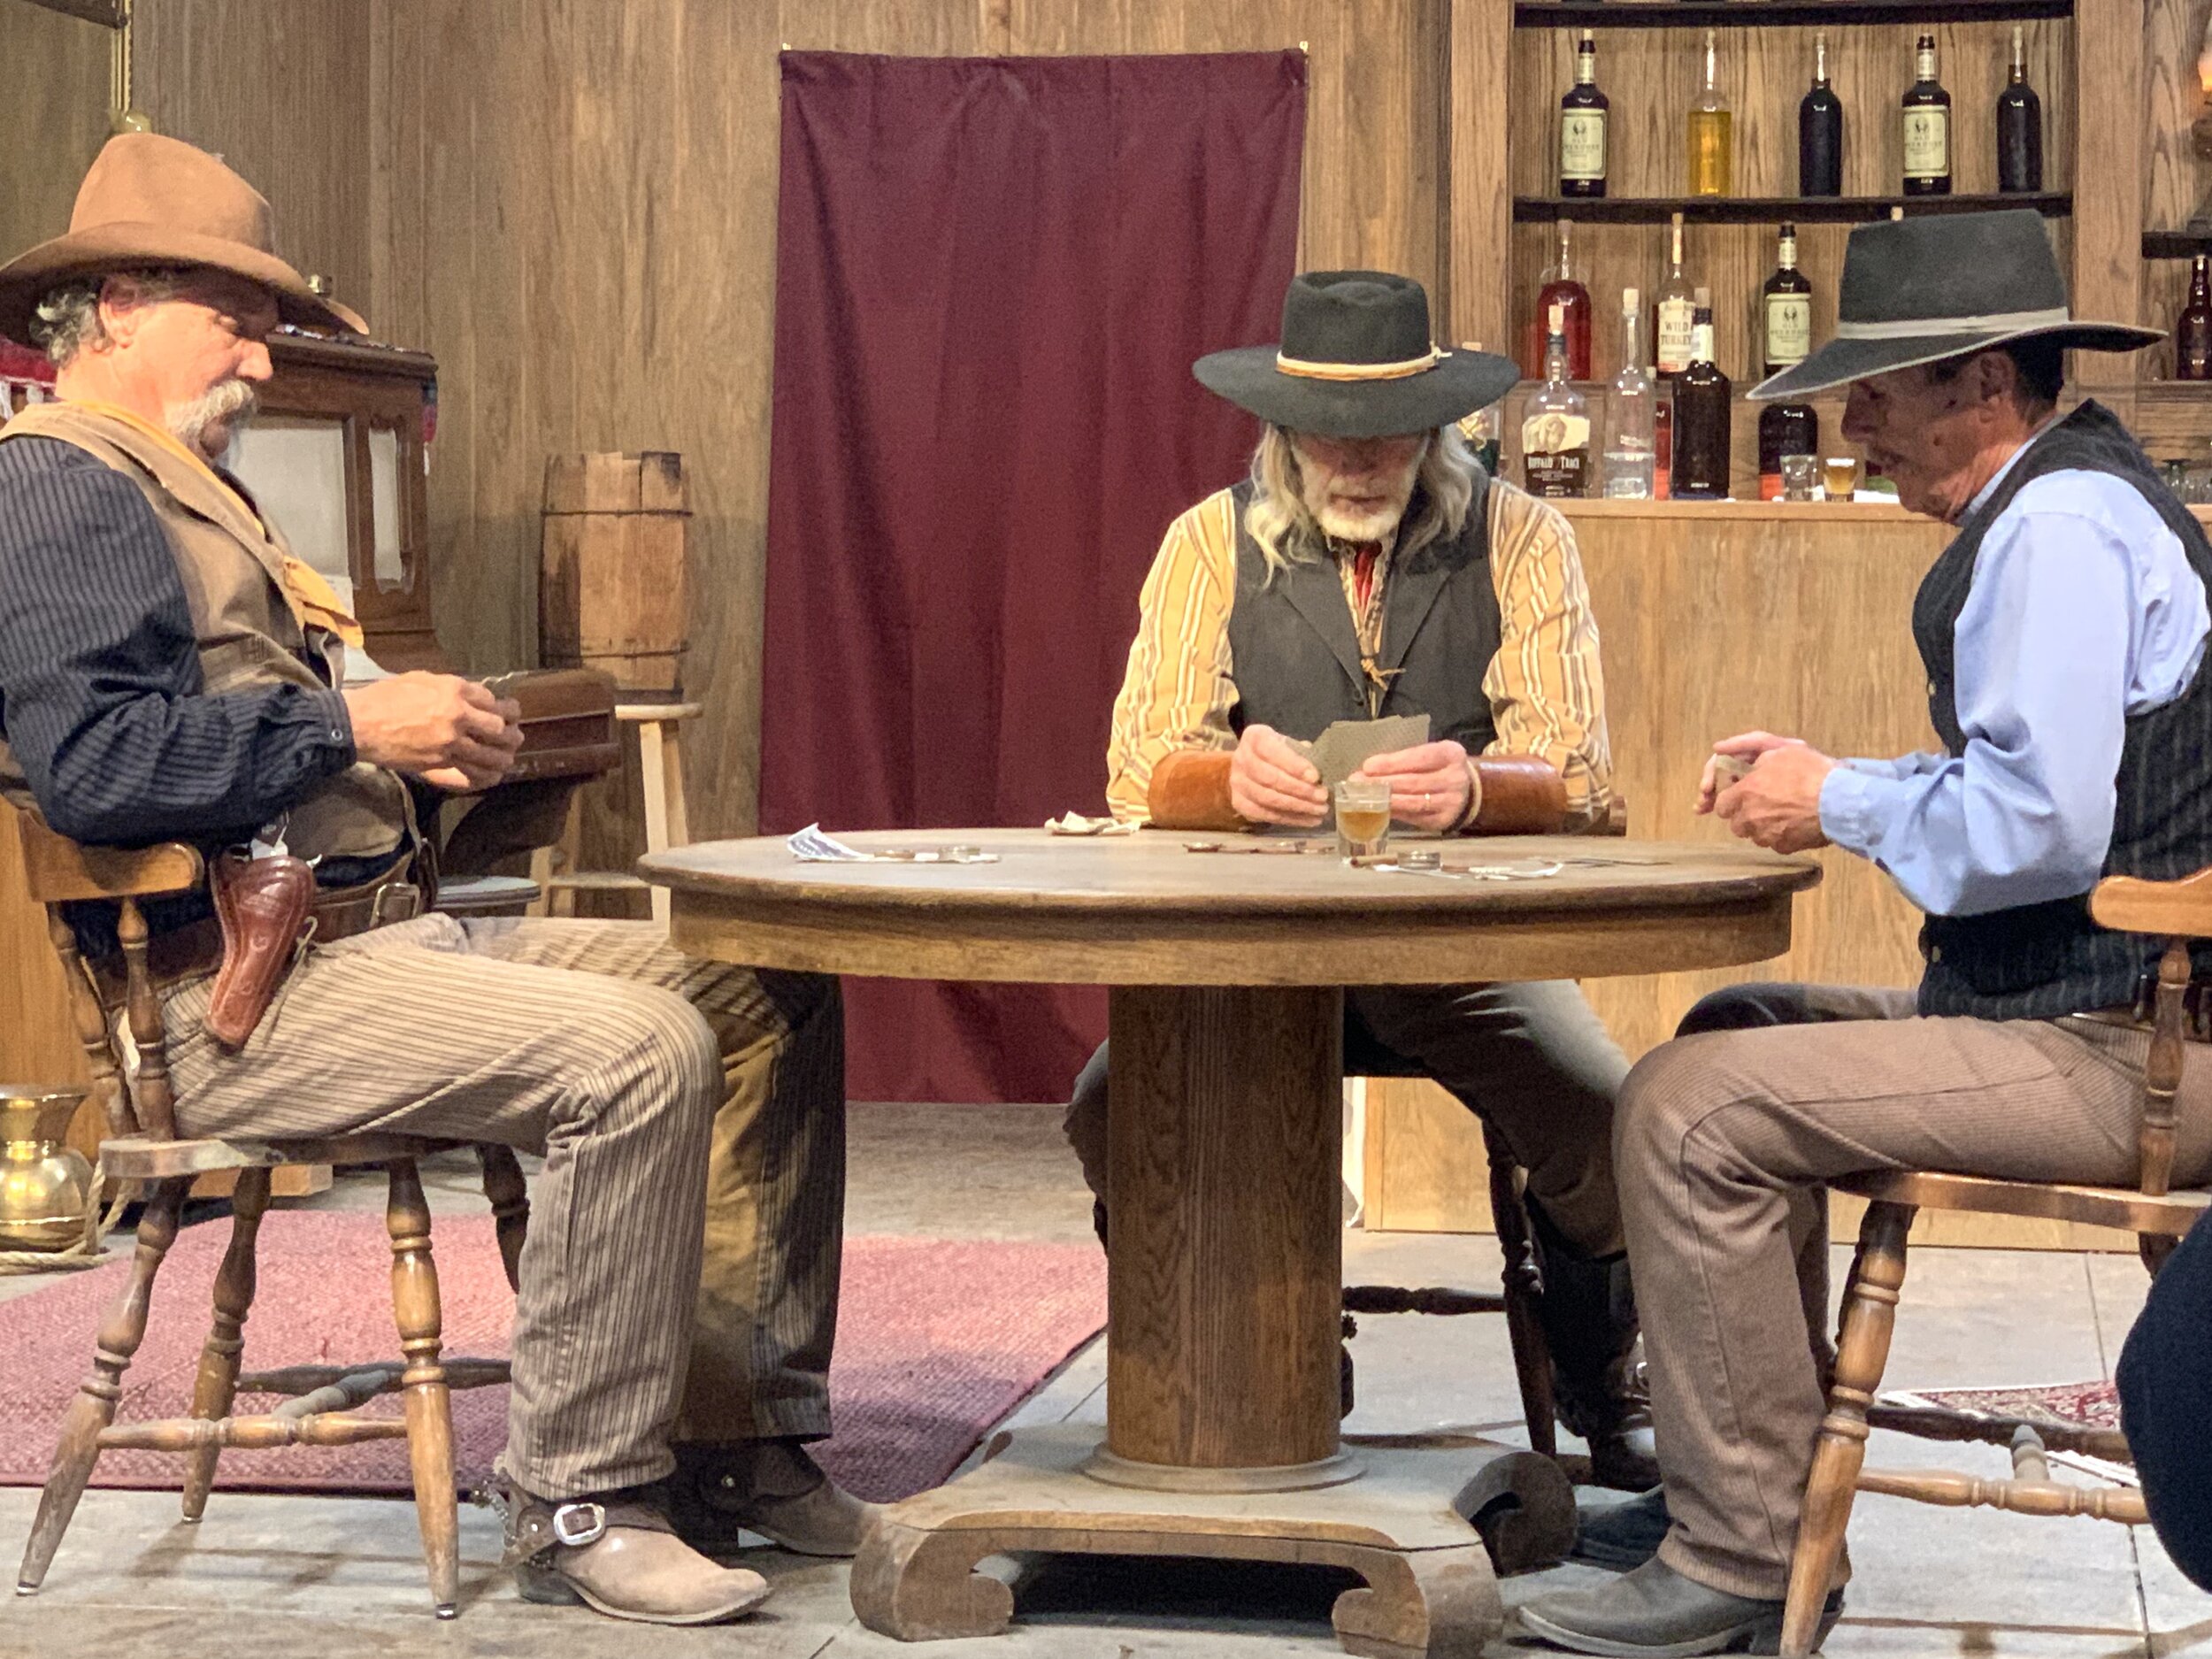  I watched Clay while Glenda attended The Gunfight Palace’s reenactment of the infamous gunfight at the O.K. Corral.  These actors are looking pretty legit! 